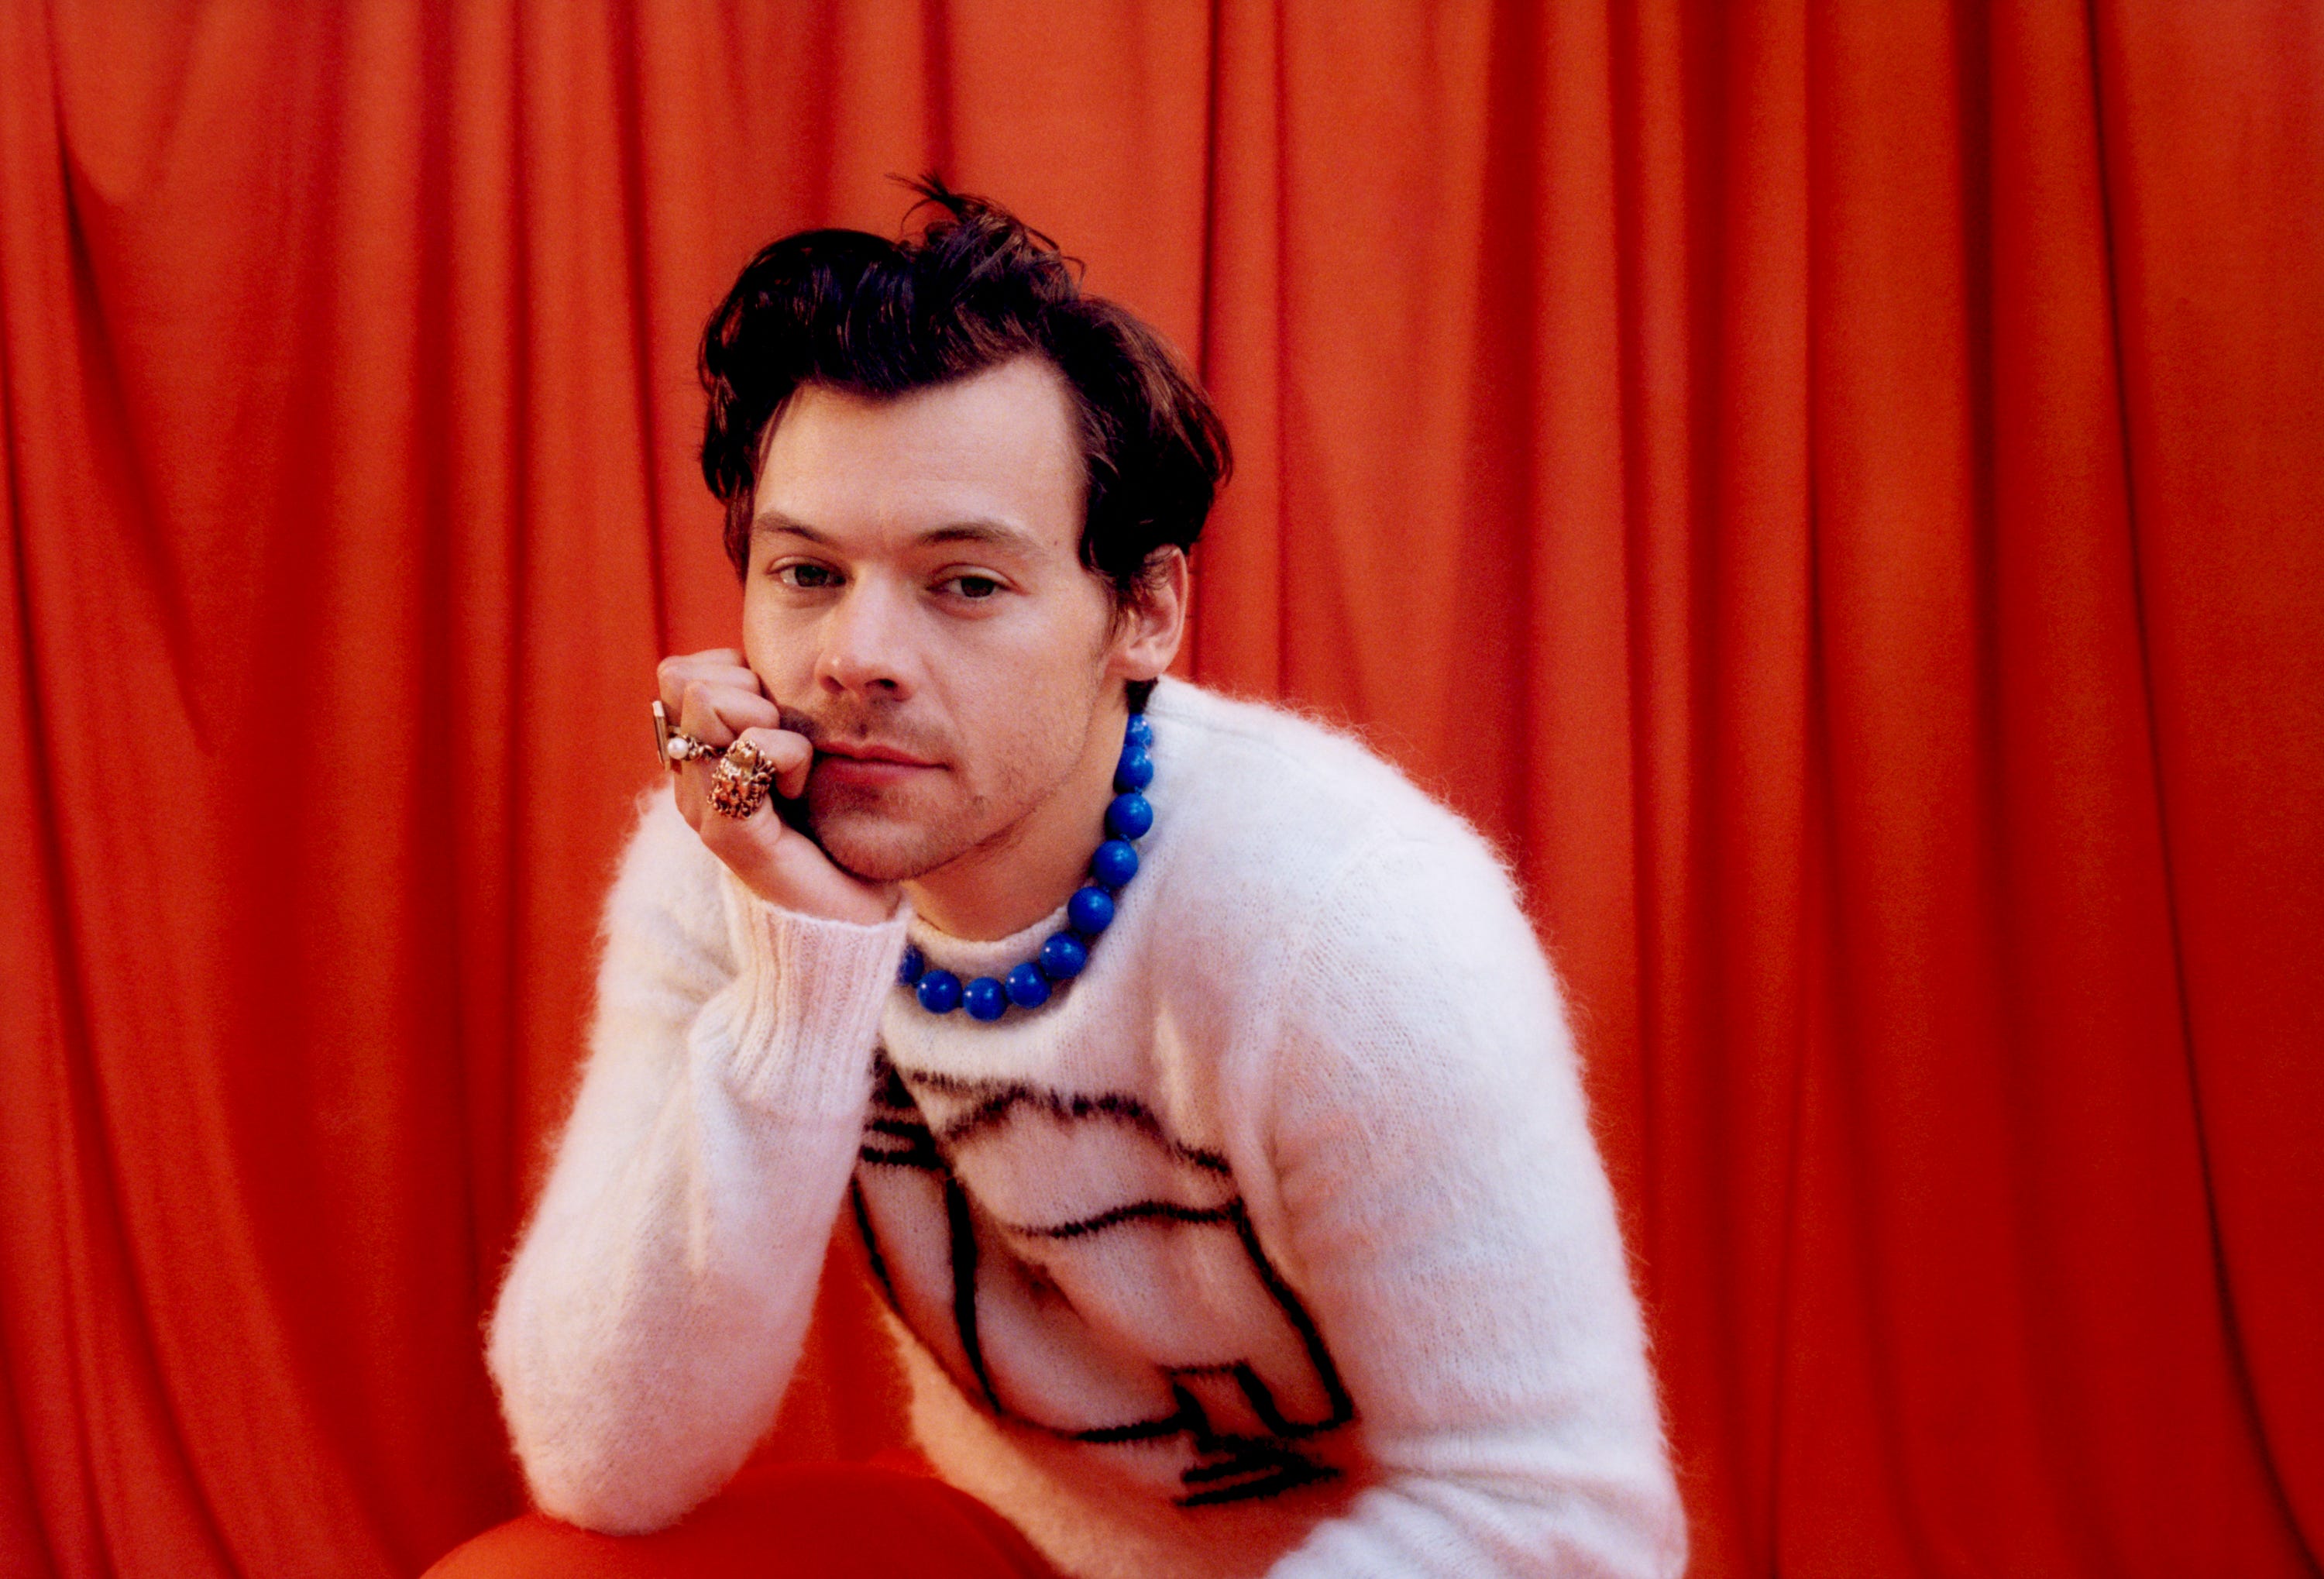 Harry Styles album review: 'Harry's House' dazzles with funk, synths